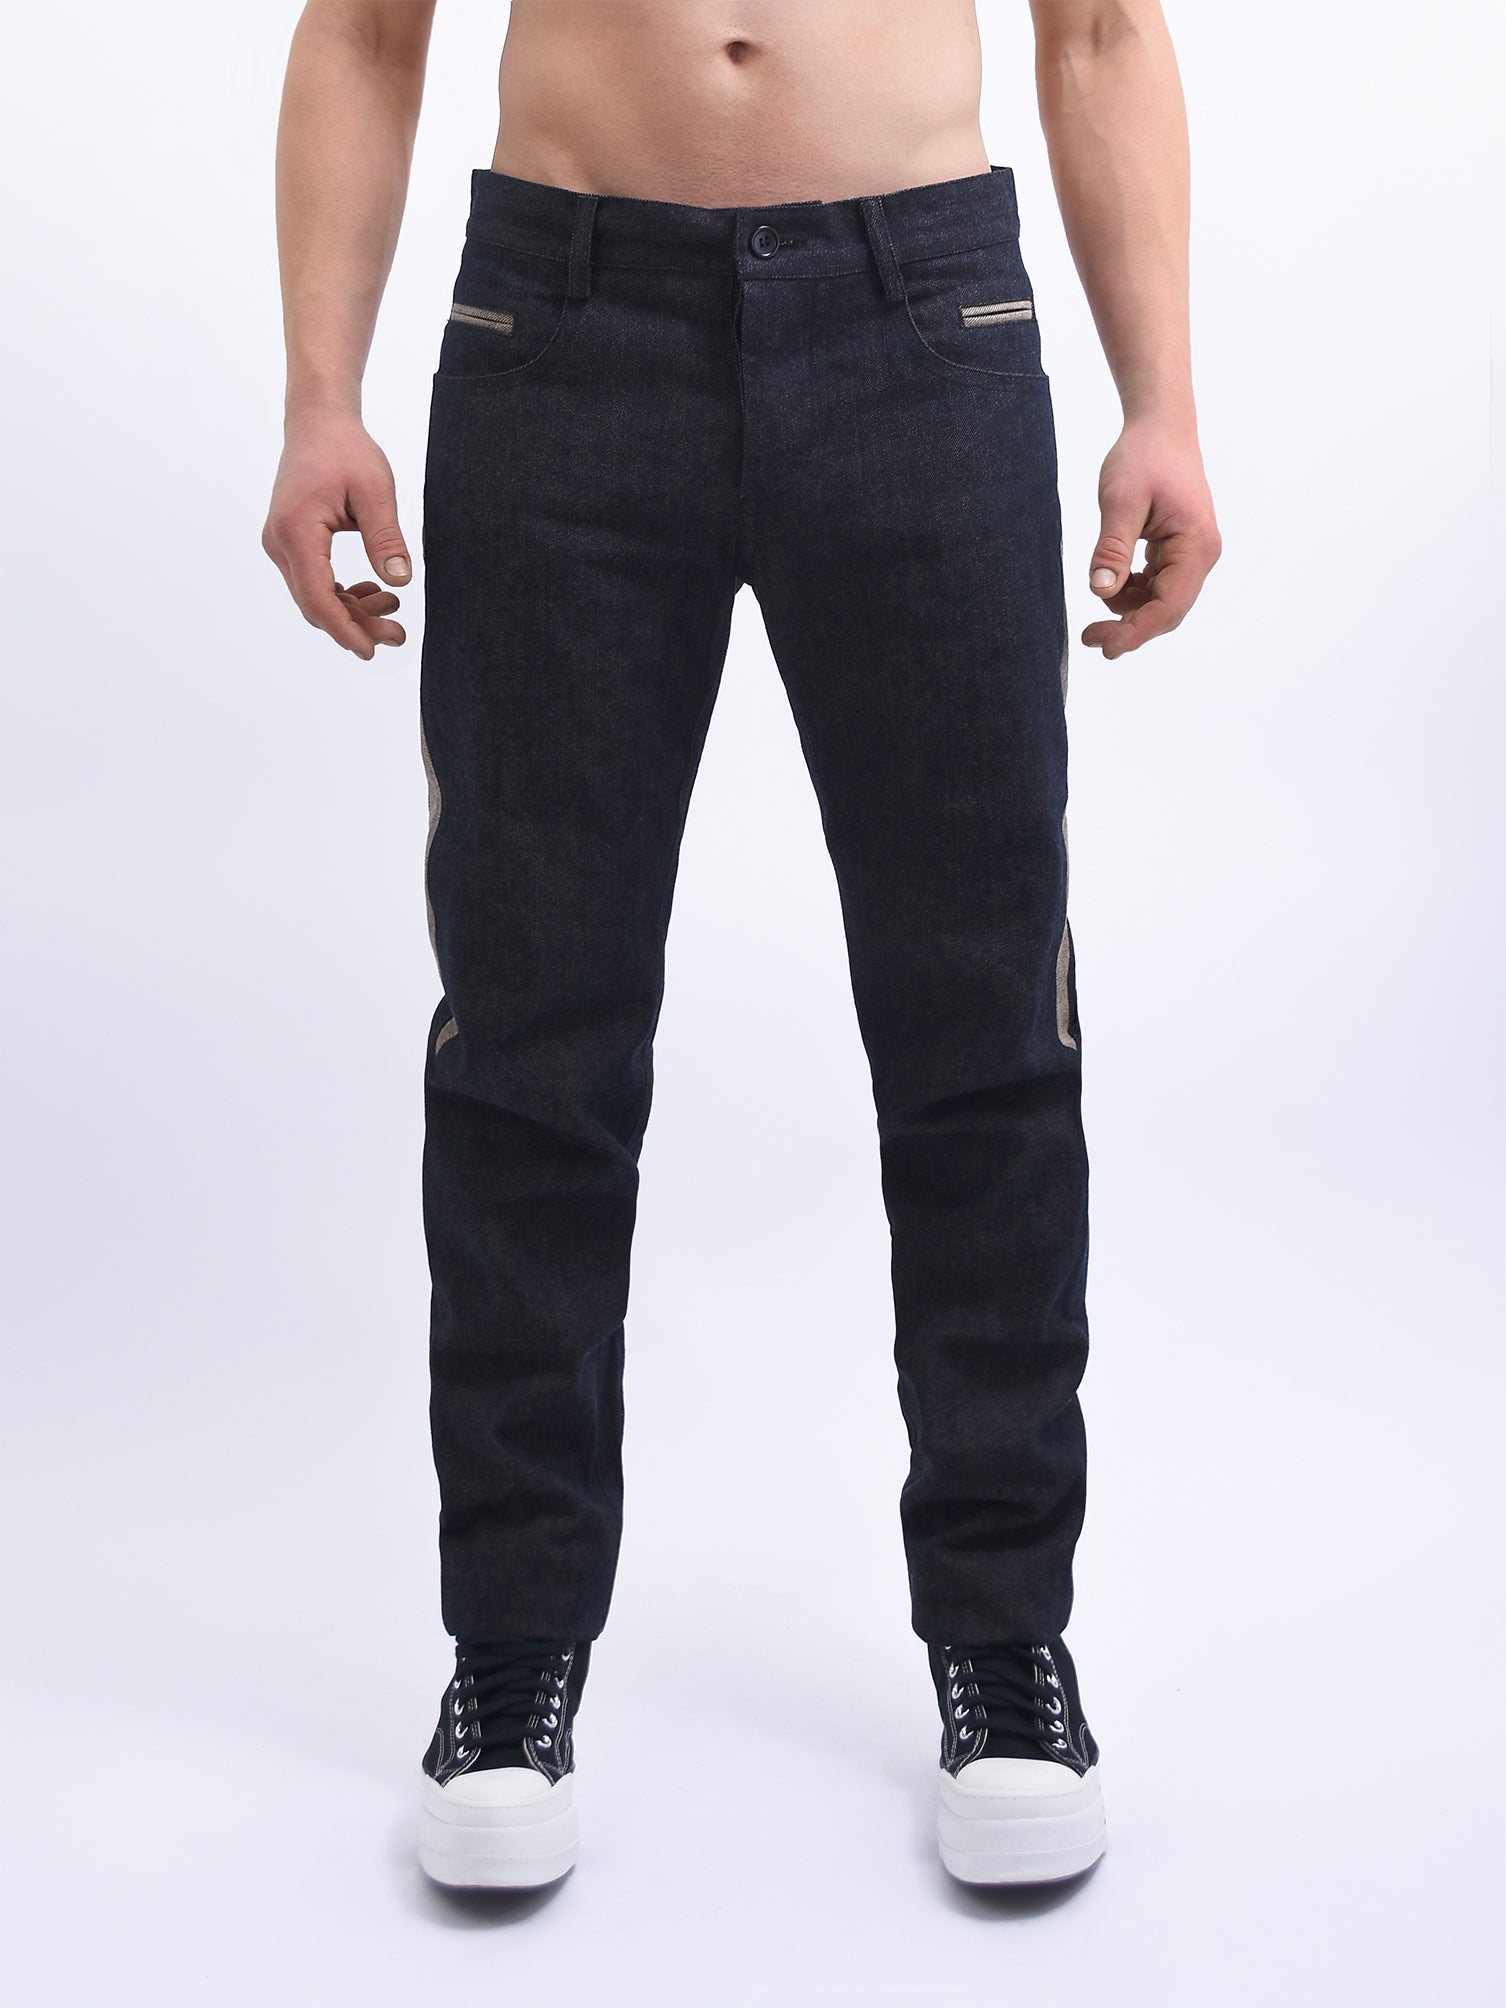 NAVY JEANS WITH CONTRAST DETAILING